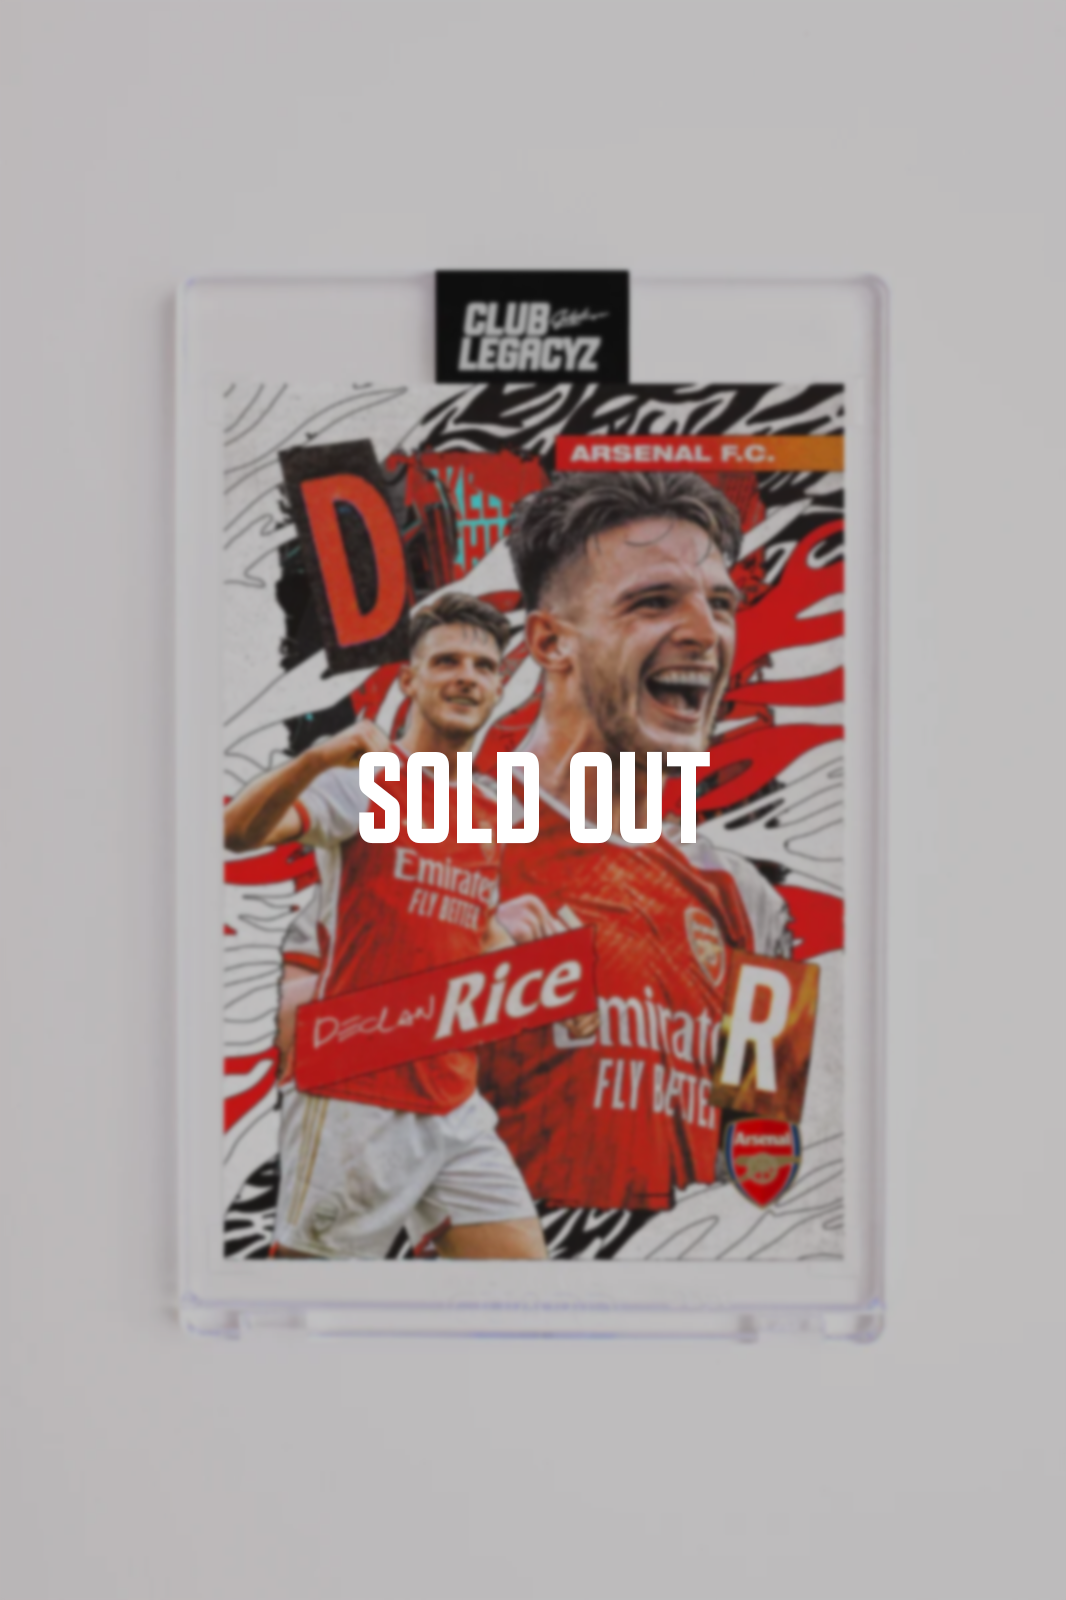 Arsenal FC - Declan Rice Icon limited to 50